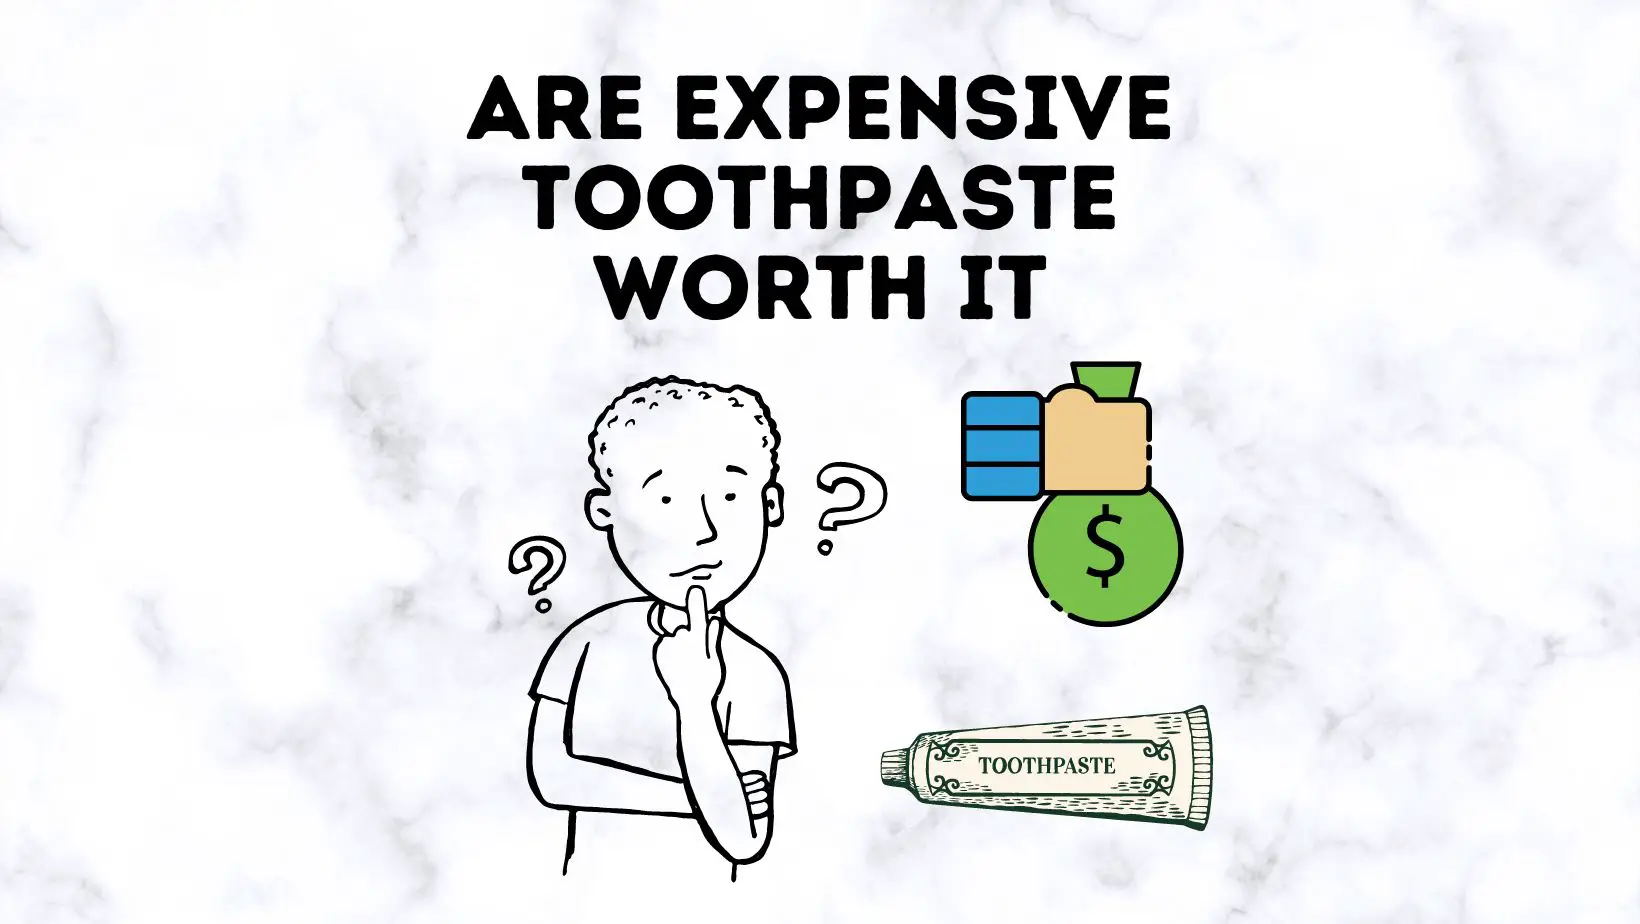 Are Expensive Toothpaste Worth It